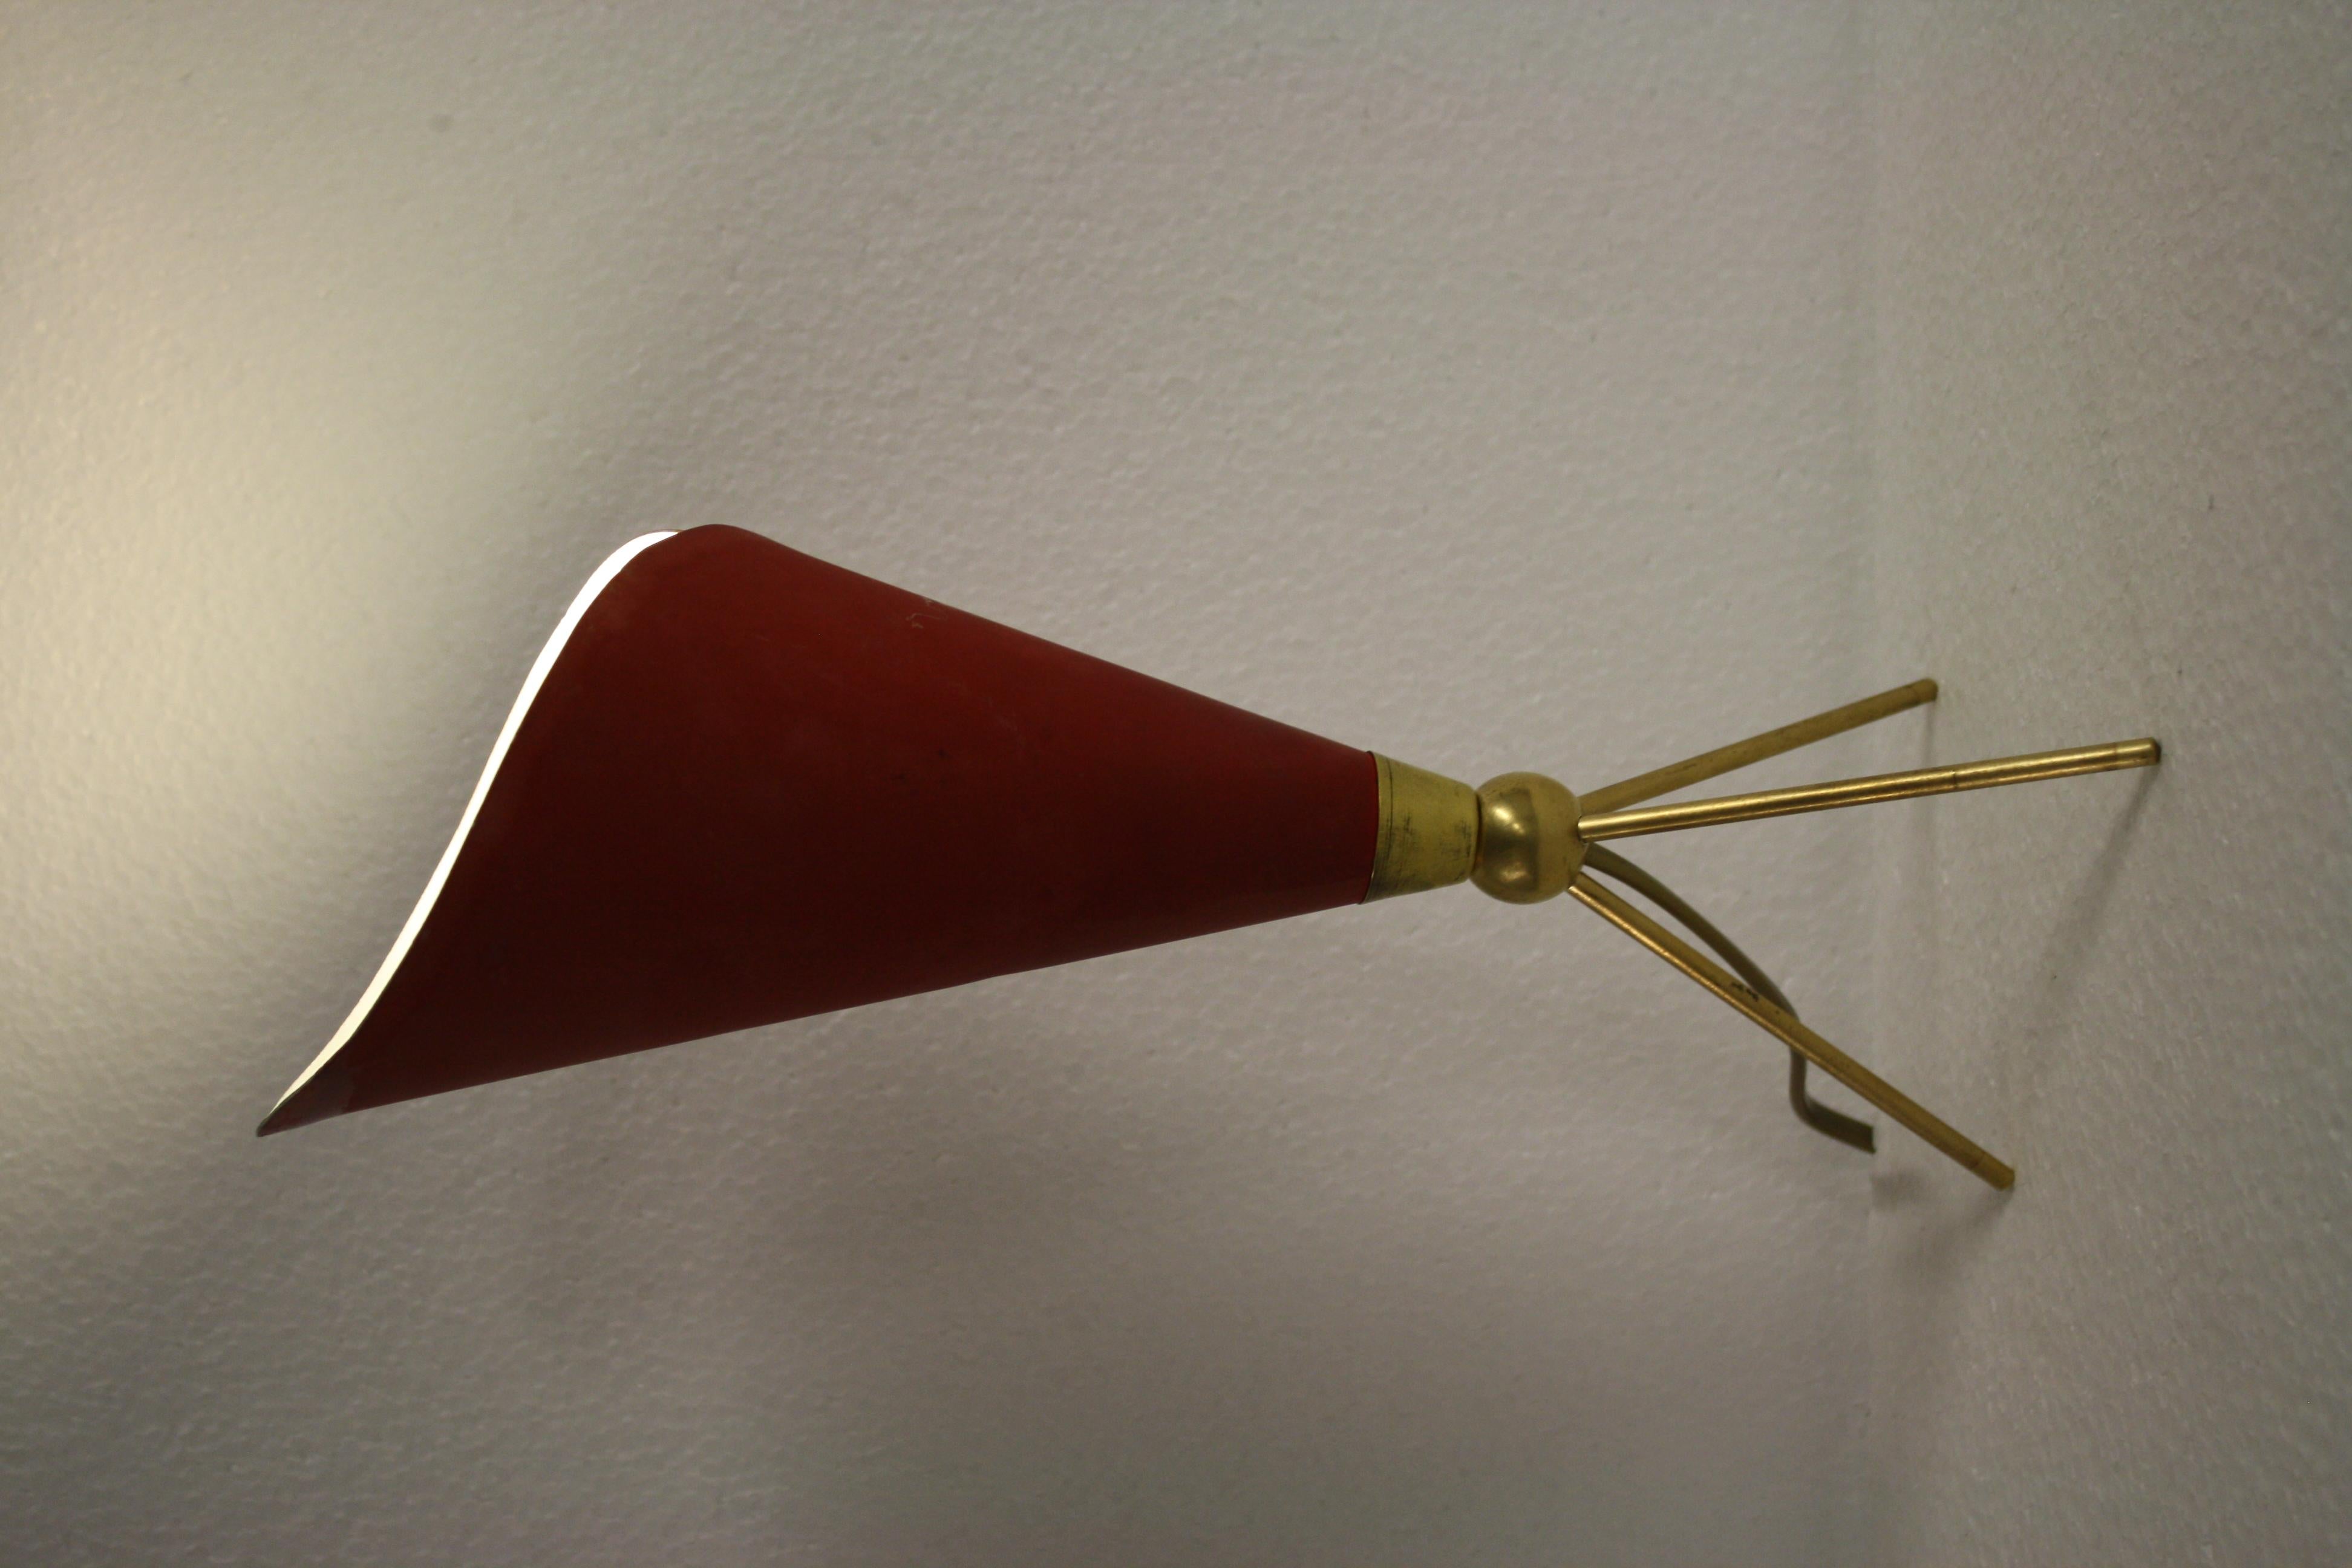 Rare table lamp made in the 1950s by Arredoluce Monza, designed by Angelo Lelli. Model: Calla. 

Consisting of a brass tripod stand with a red aluminium shade.

The lamp is very well preserved.

There is a spot at the top of the shade where